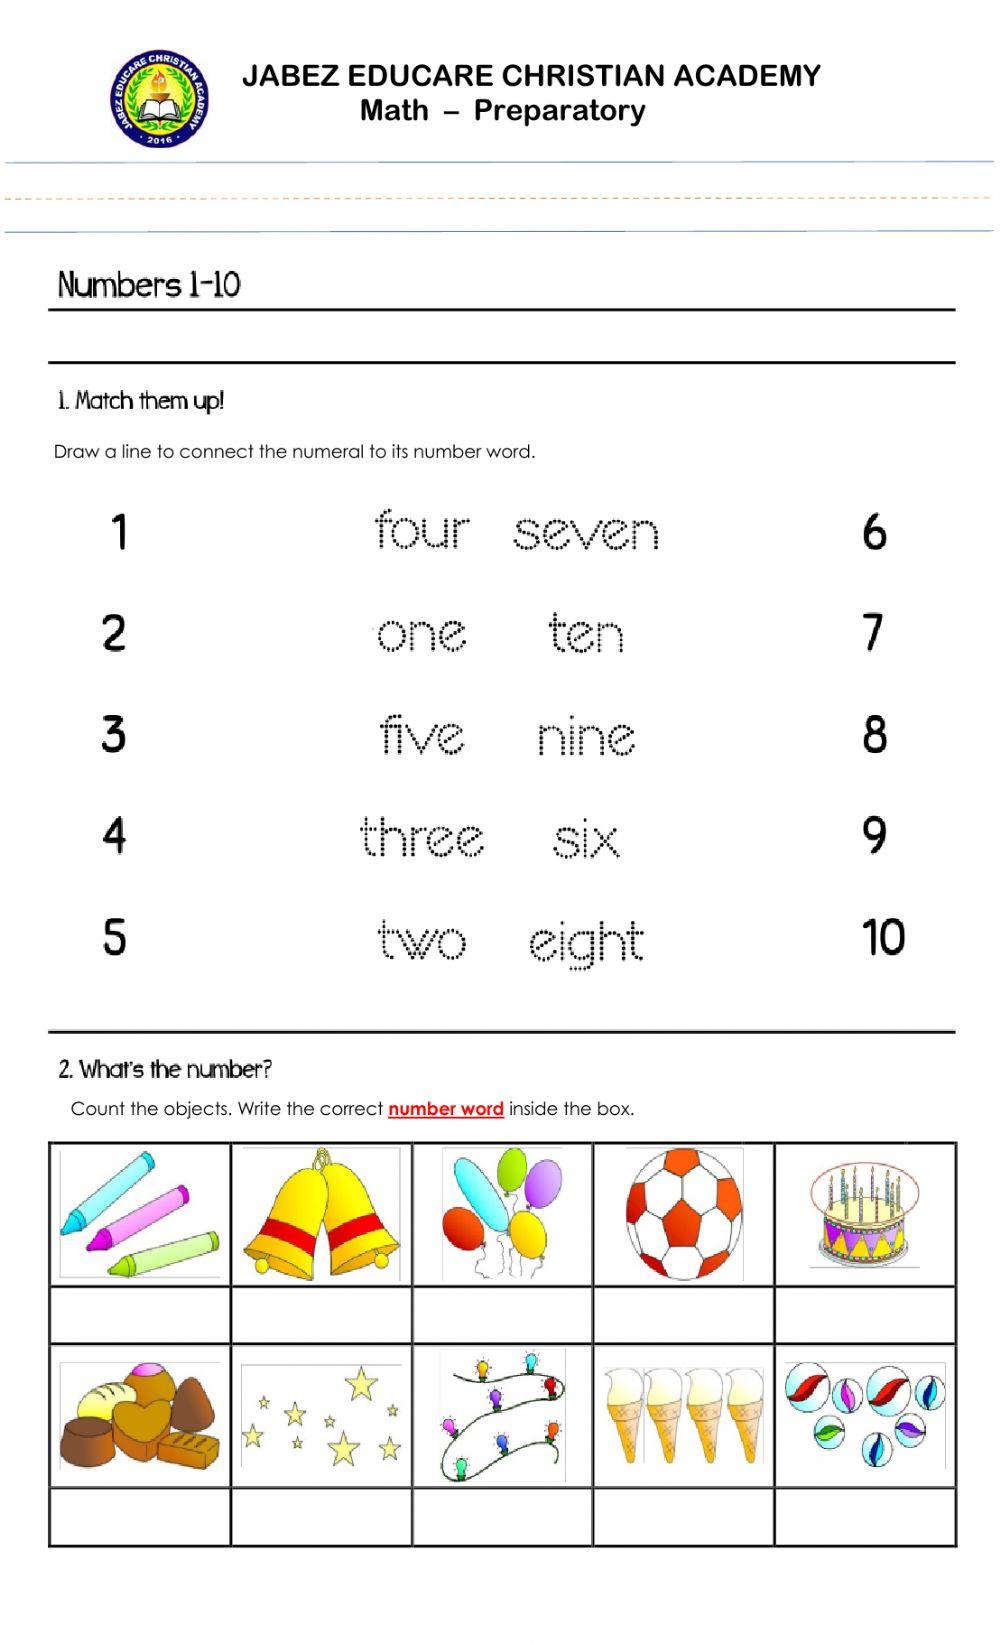 Letter Ll, Number Words -10, filipino, Parts of Plants